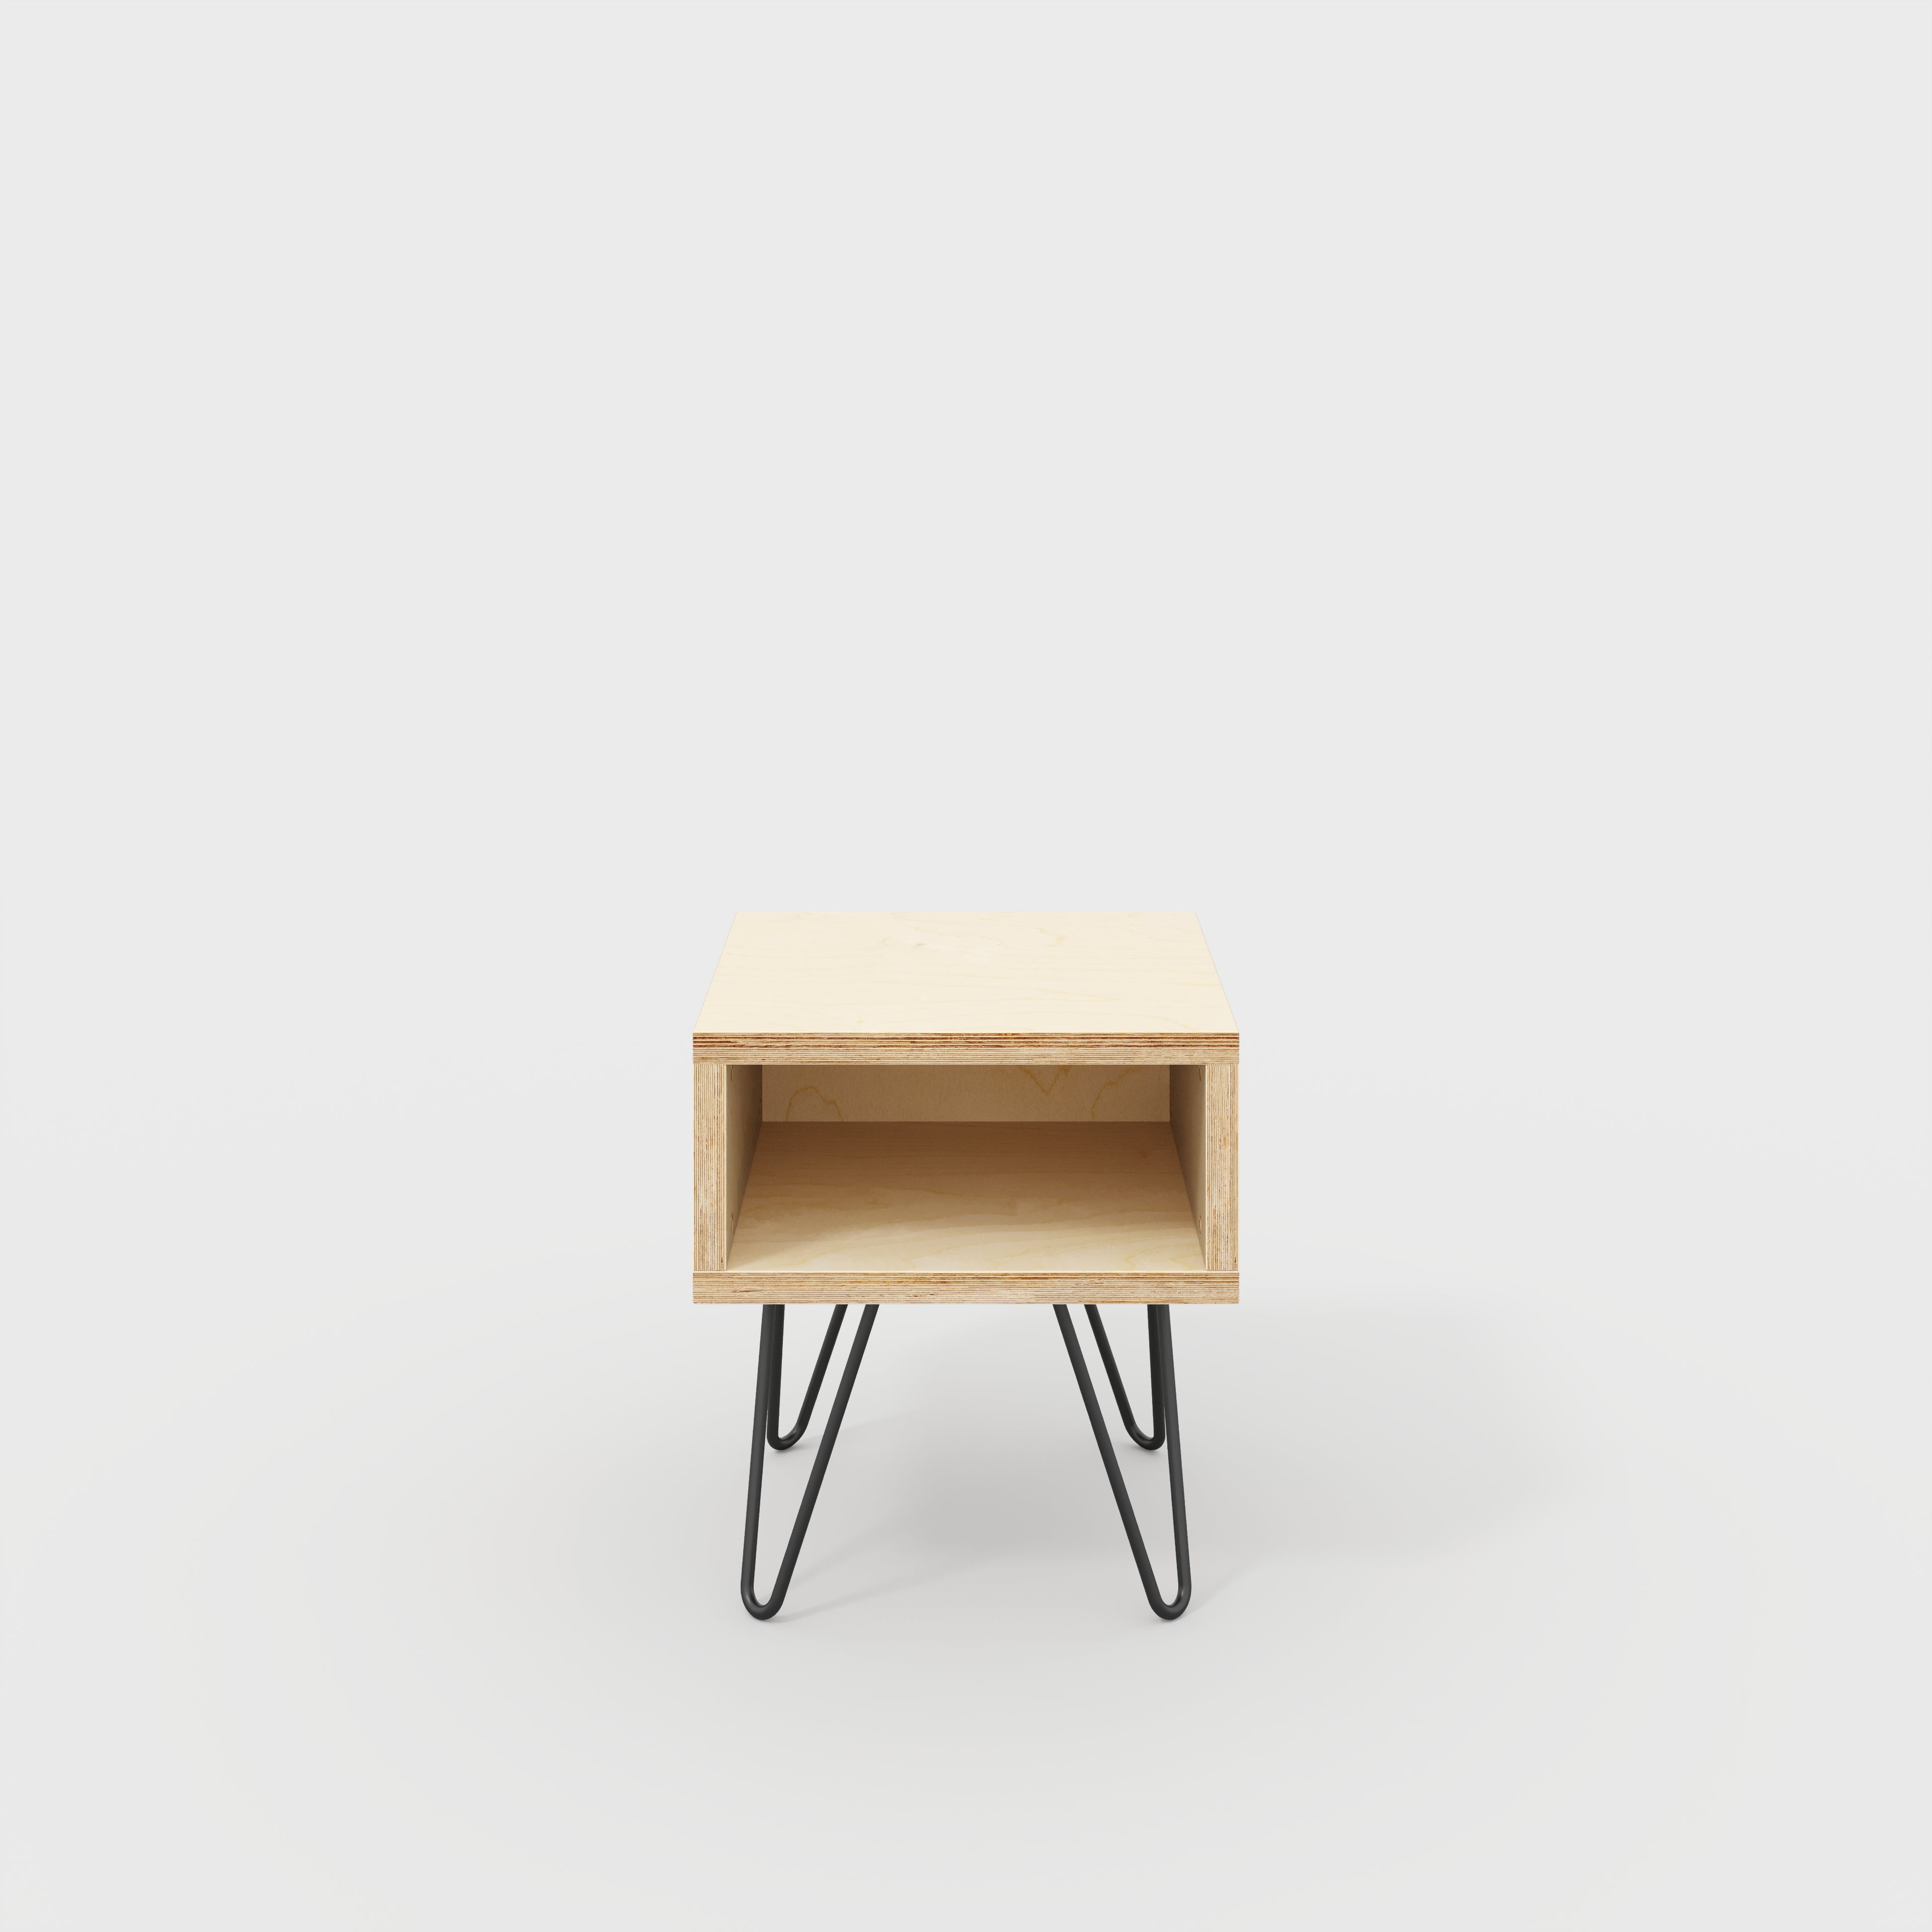 Bedside Table with Box Storage and Black Hairpin Legs - Plywood Birch - 400(w) x 400(d) x 450(h)